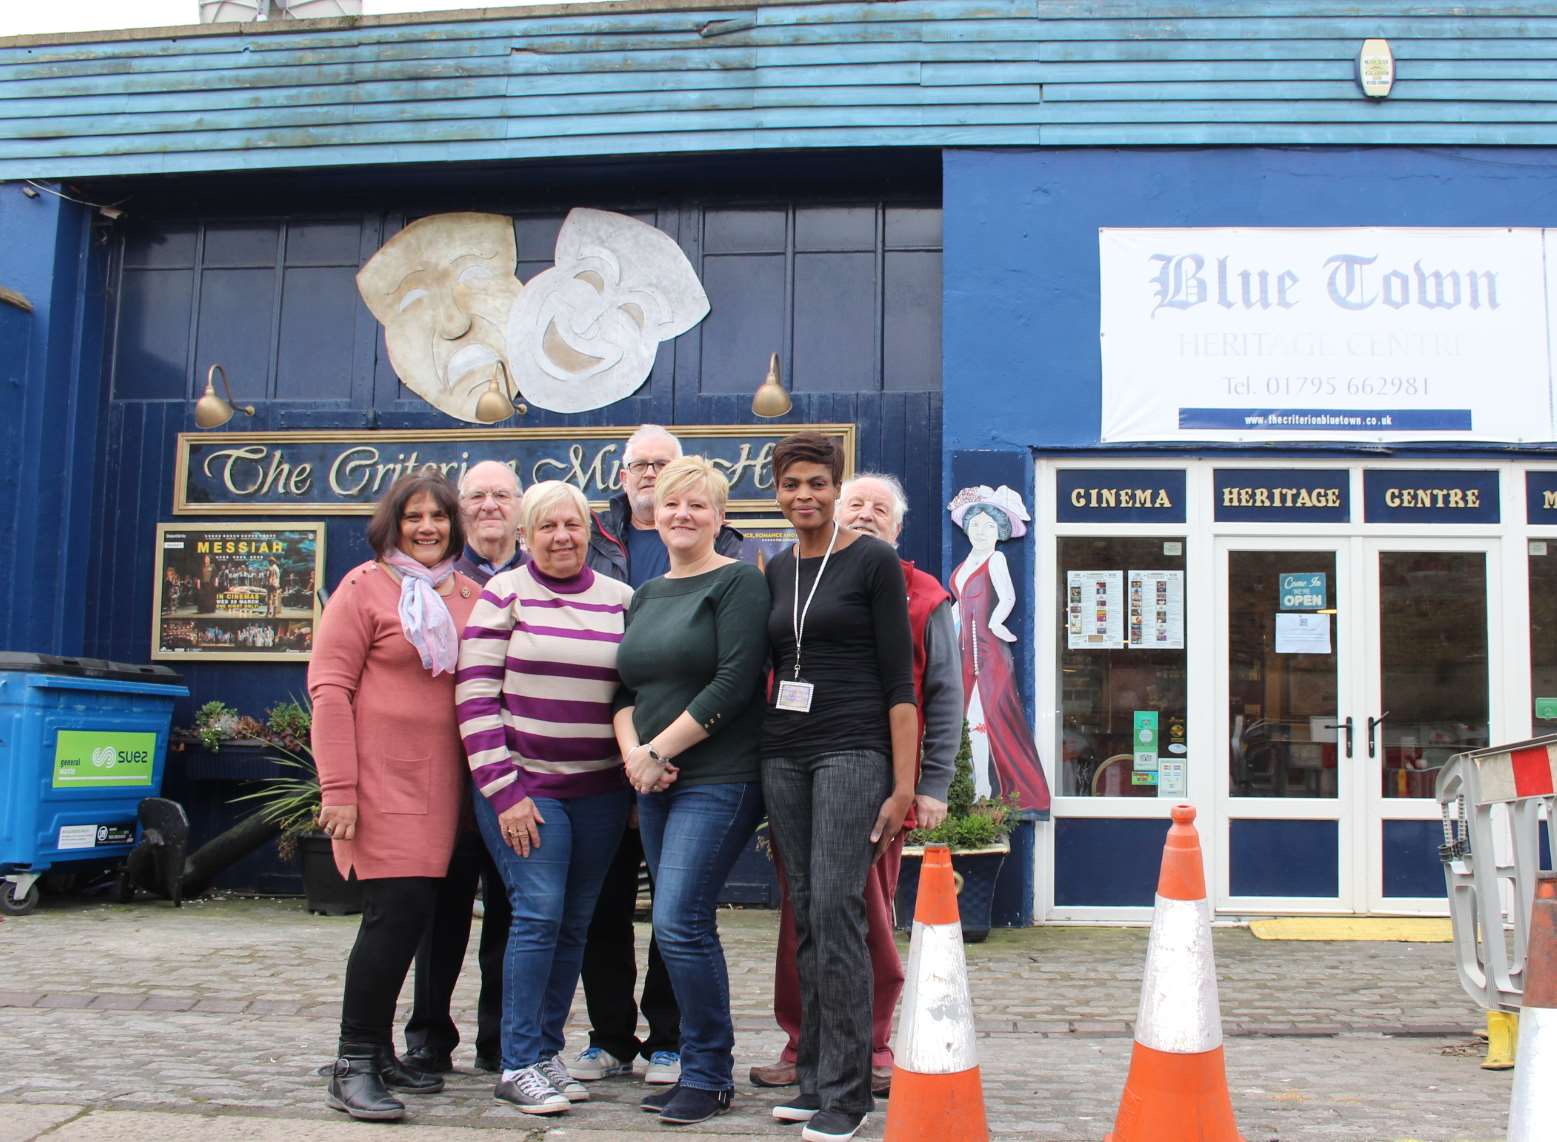 Some of the volunteers helping Jenny and Ian Hurkett rebuild the Criterion Theatre in Blue Town, Sheerness, after losing out to a Heritage Lottery Fund application.